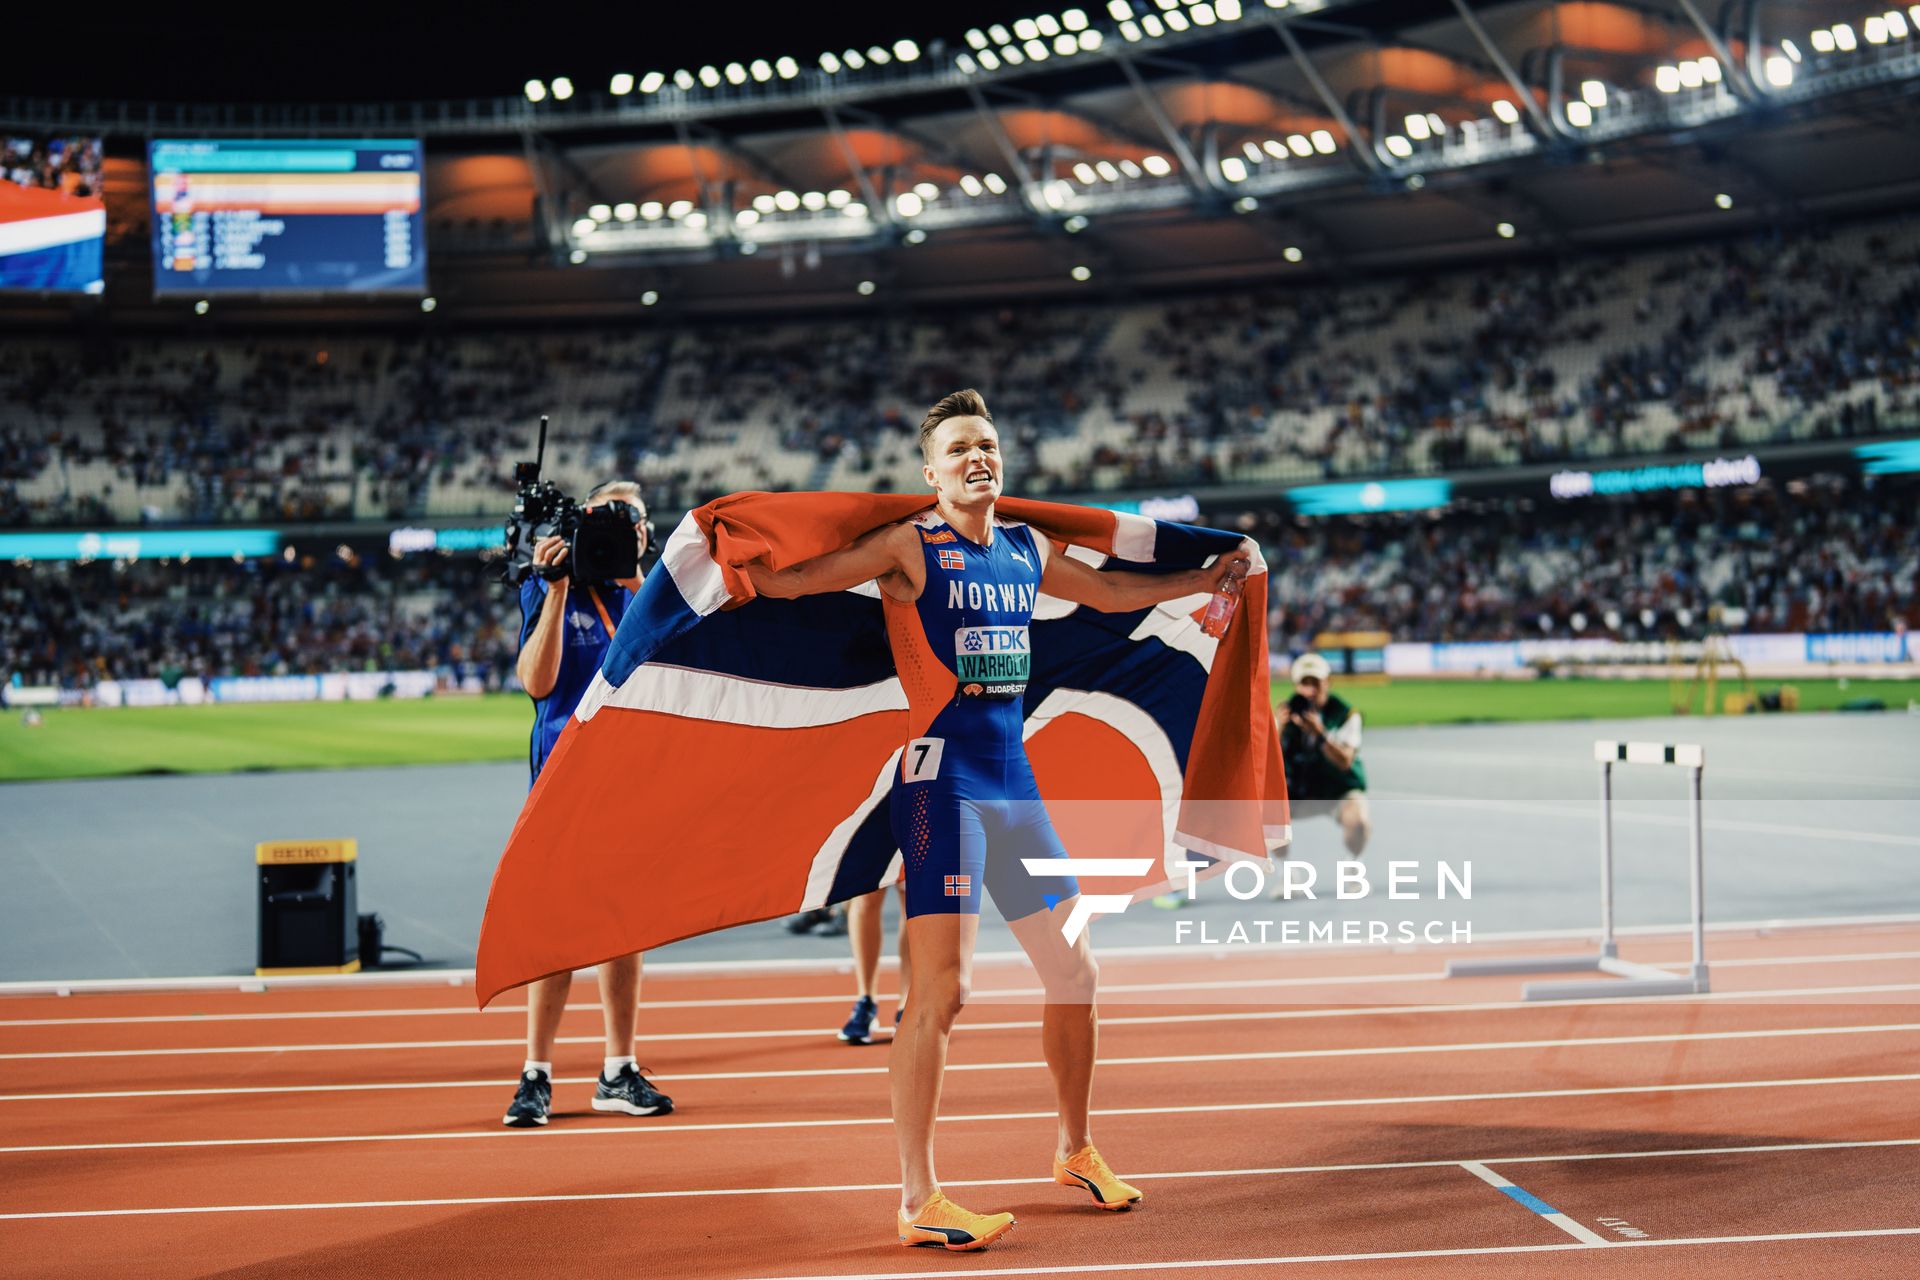 Karsten Warholm (NOR/Norway) during the 400 Metres Hurdles Final on Day 5 of the World Athletics Championships Budapest 23 at the National Athletics Centre in Budapest, Hungary on August 23, 2023.